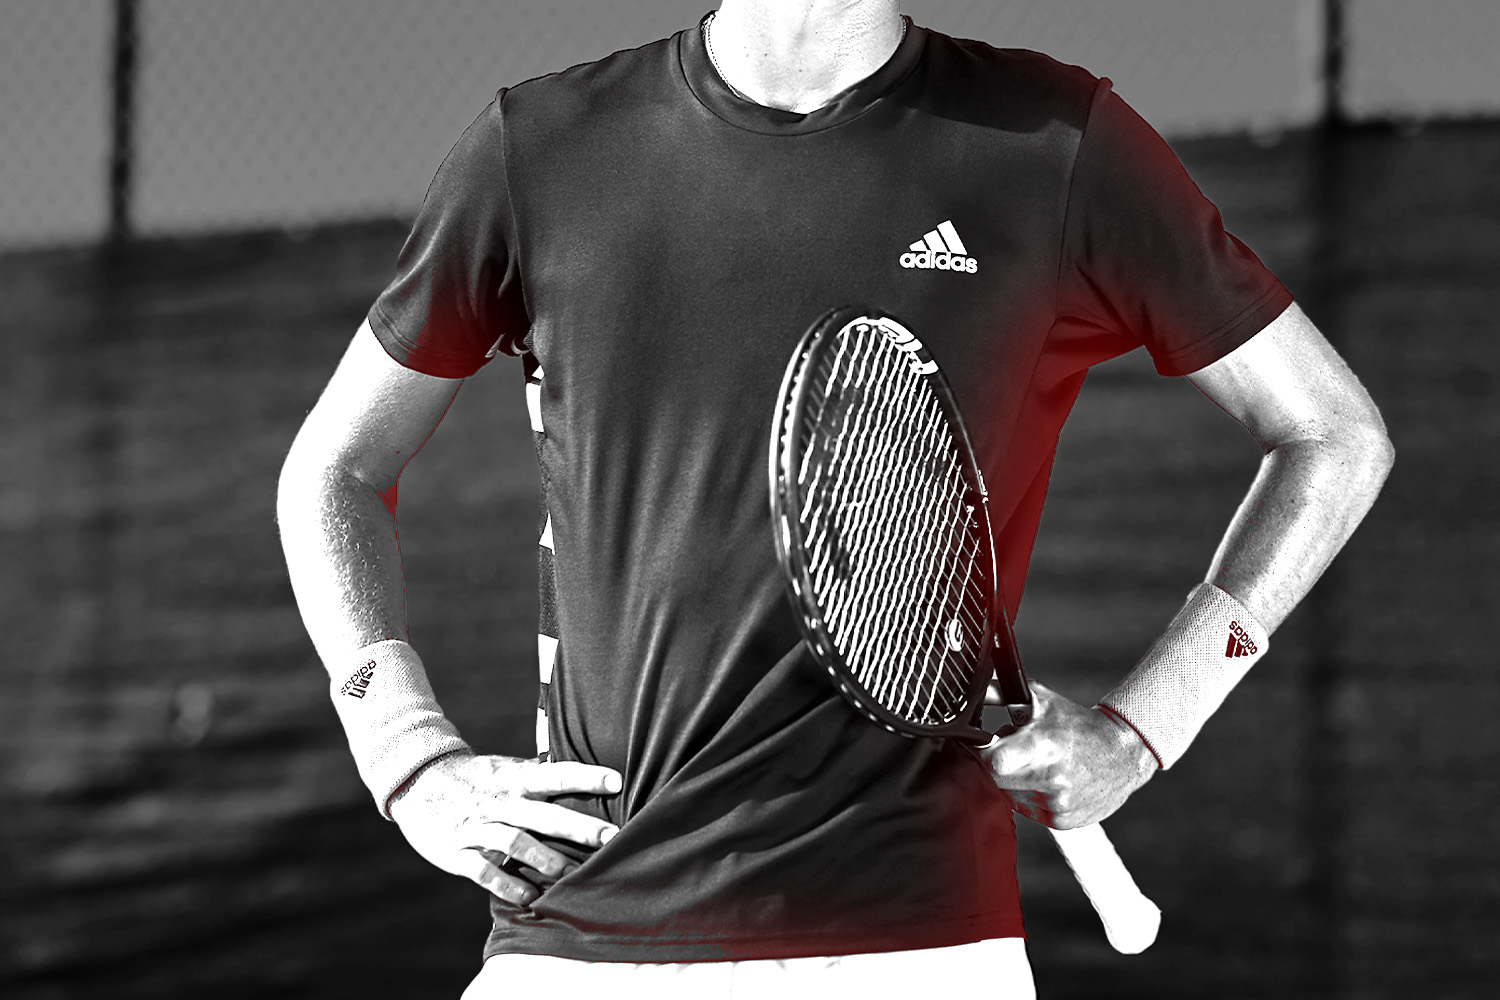 person_with_adidas_shirt_holding_tennis_racquet